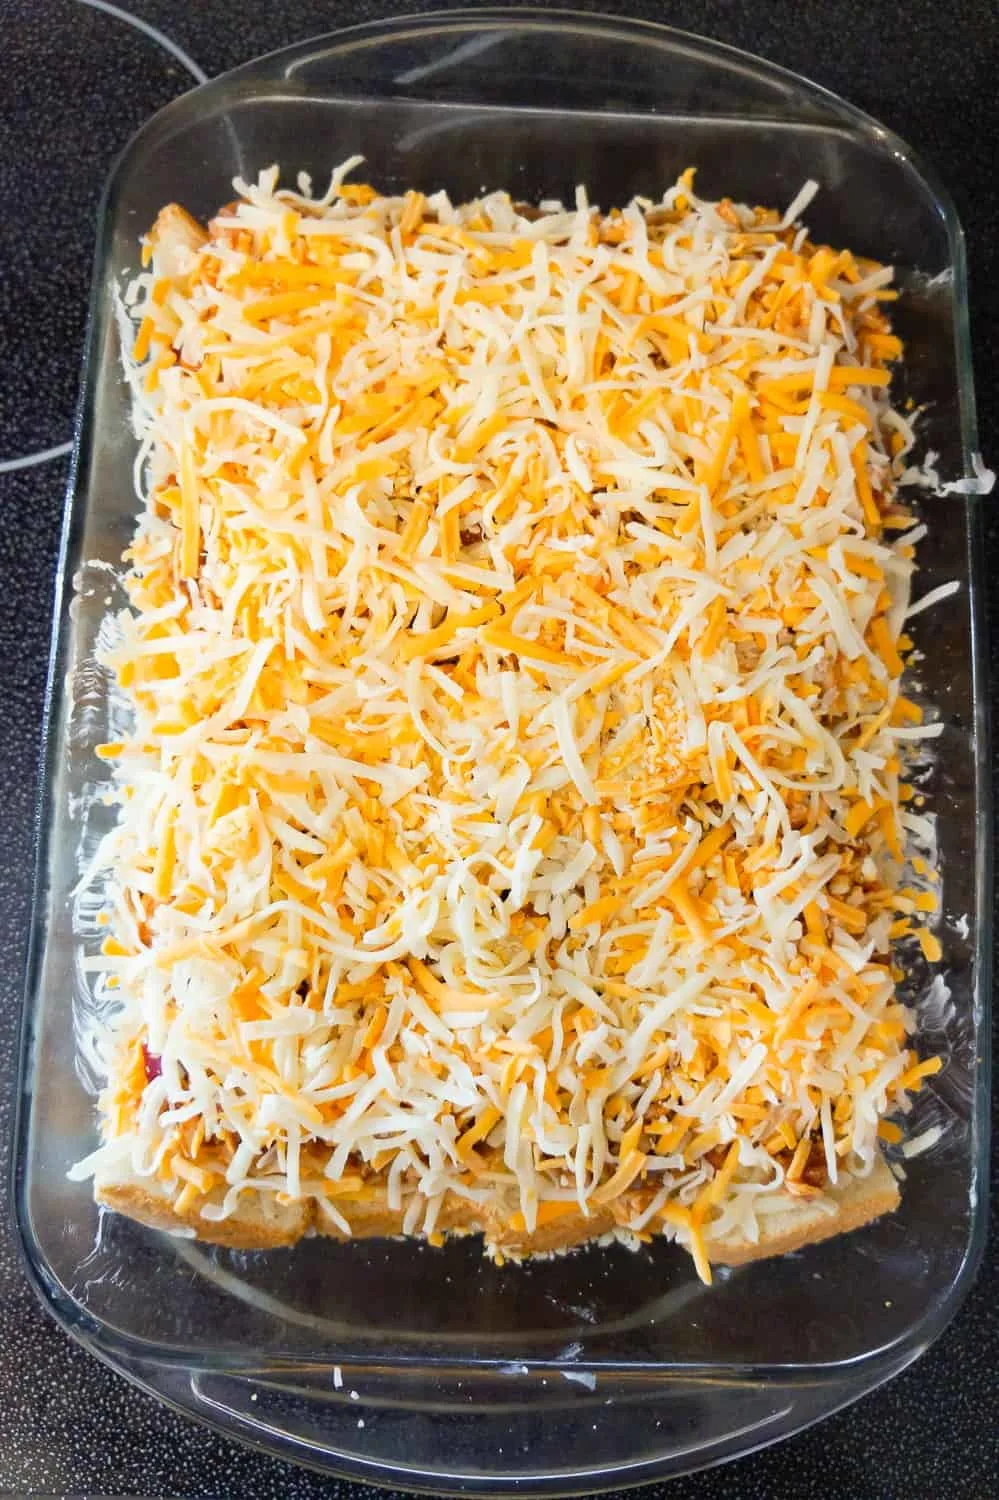 shredded mozzarella and cheddar cheese on top of chicken mixture in a baking dish